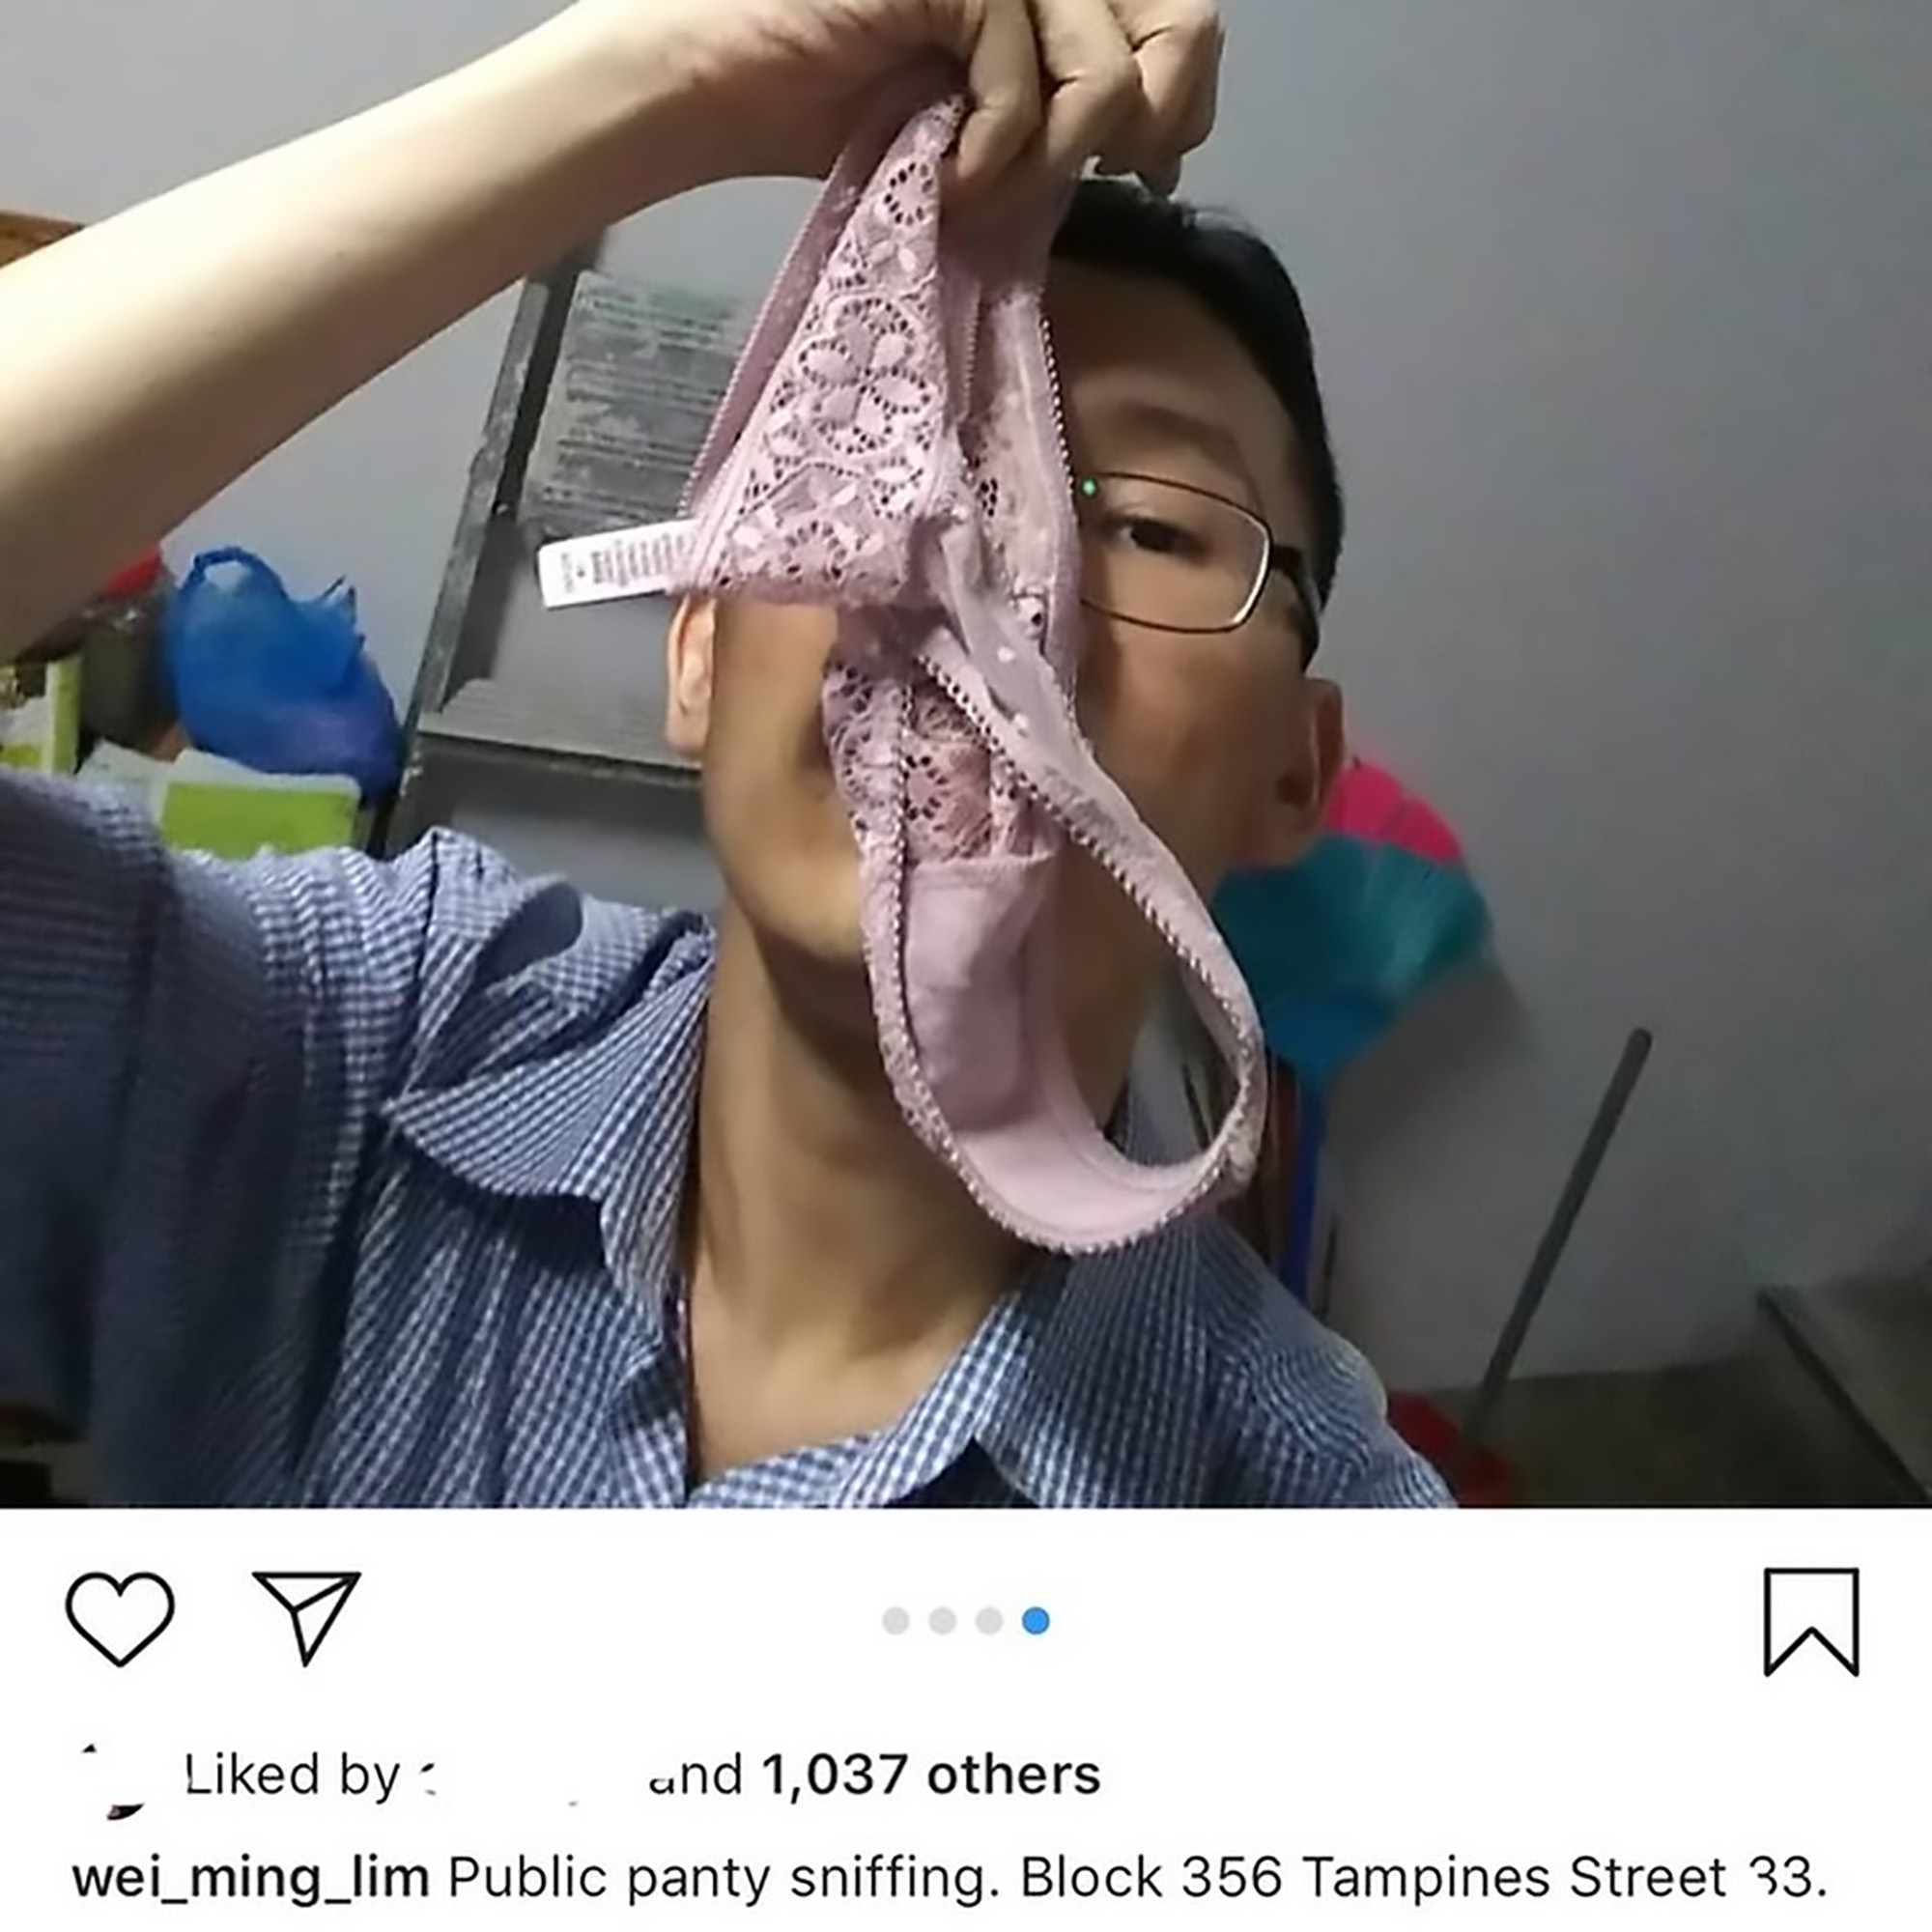 Insta Perv Nicked For Sniffing Stolen Undies For Snaps.